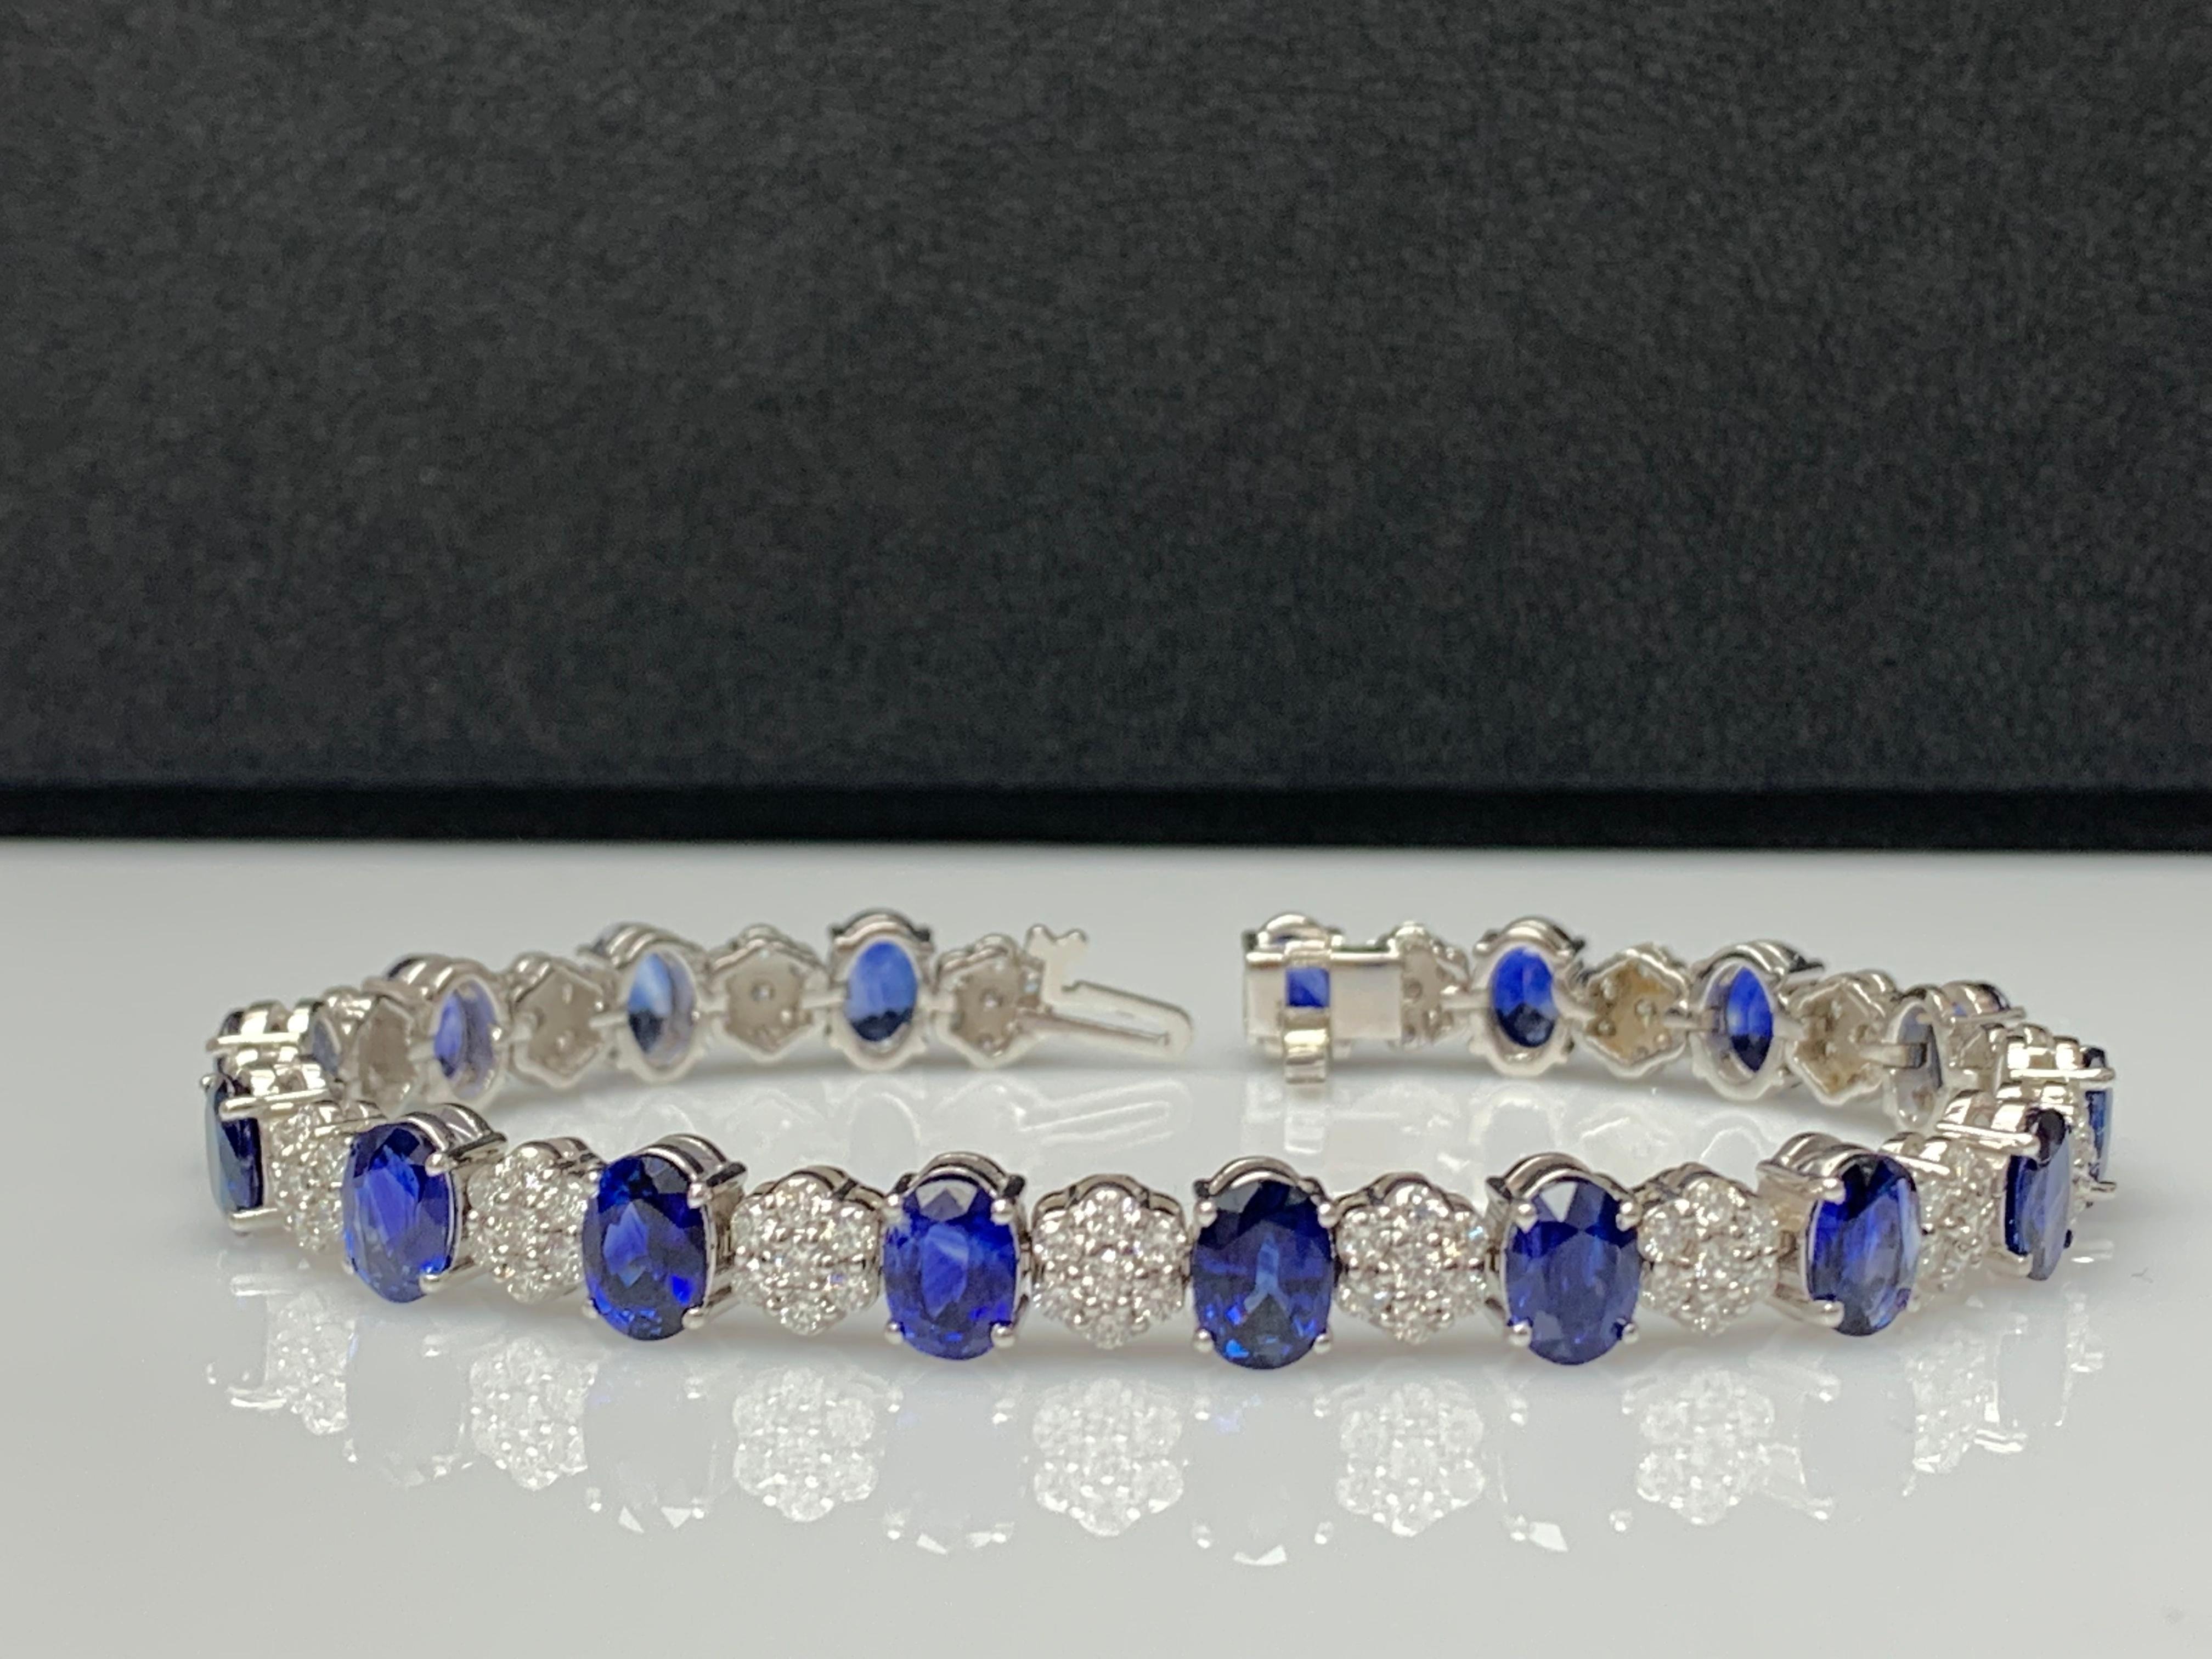 15.26 Carat Oval Cut Blue Sapphire and Diamond Tennis Bracelet in 14K White Gold For Sale 9